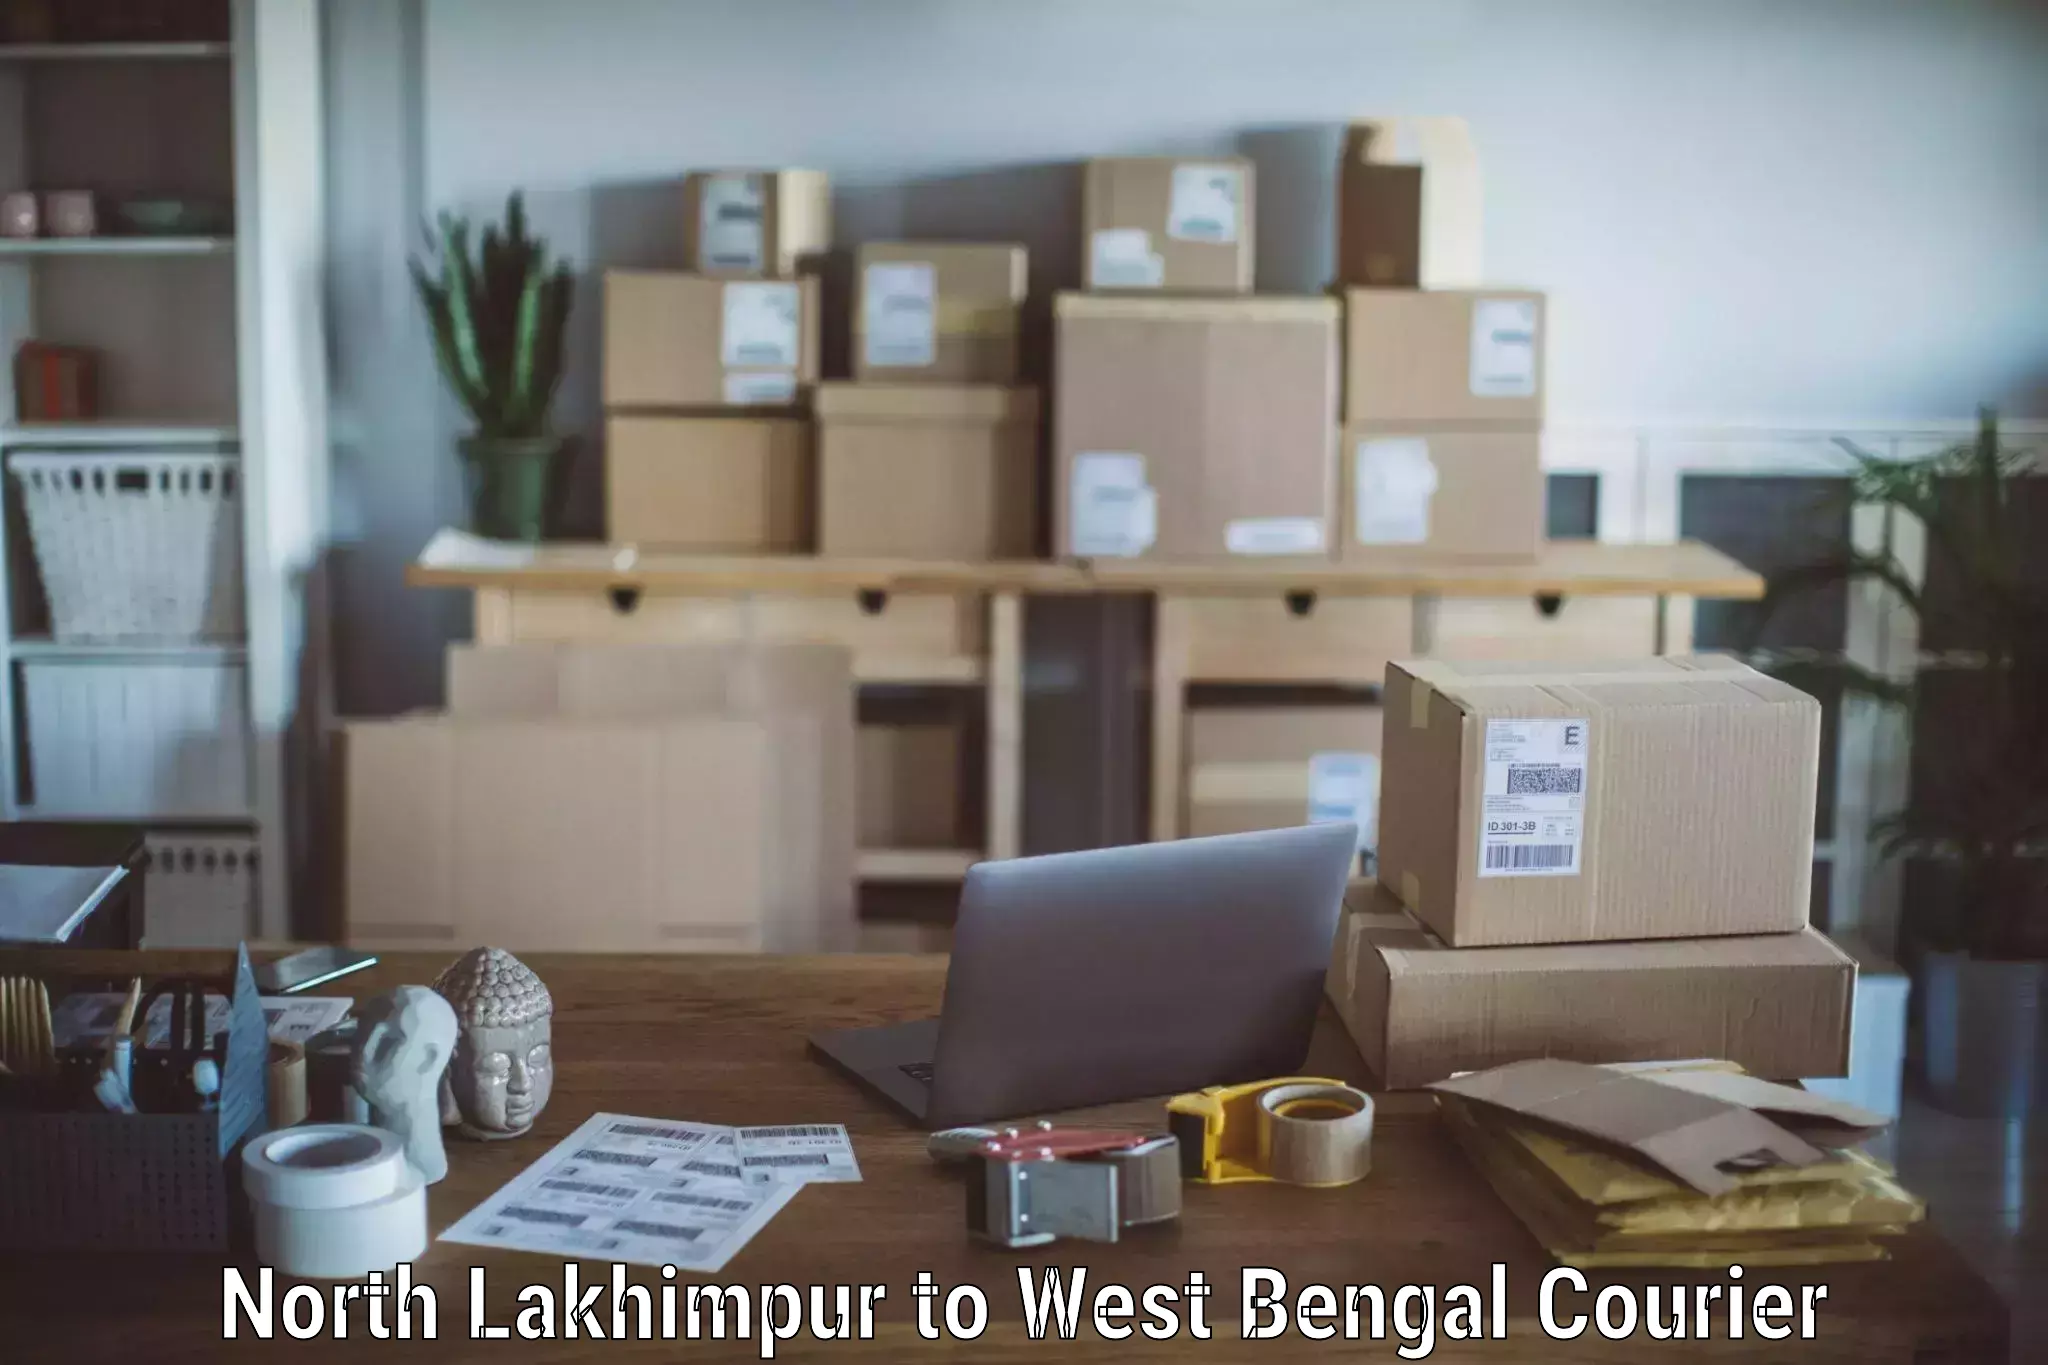 Professional moving assistance North Lakhimpur to Bagdogra